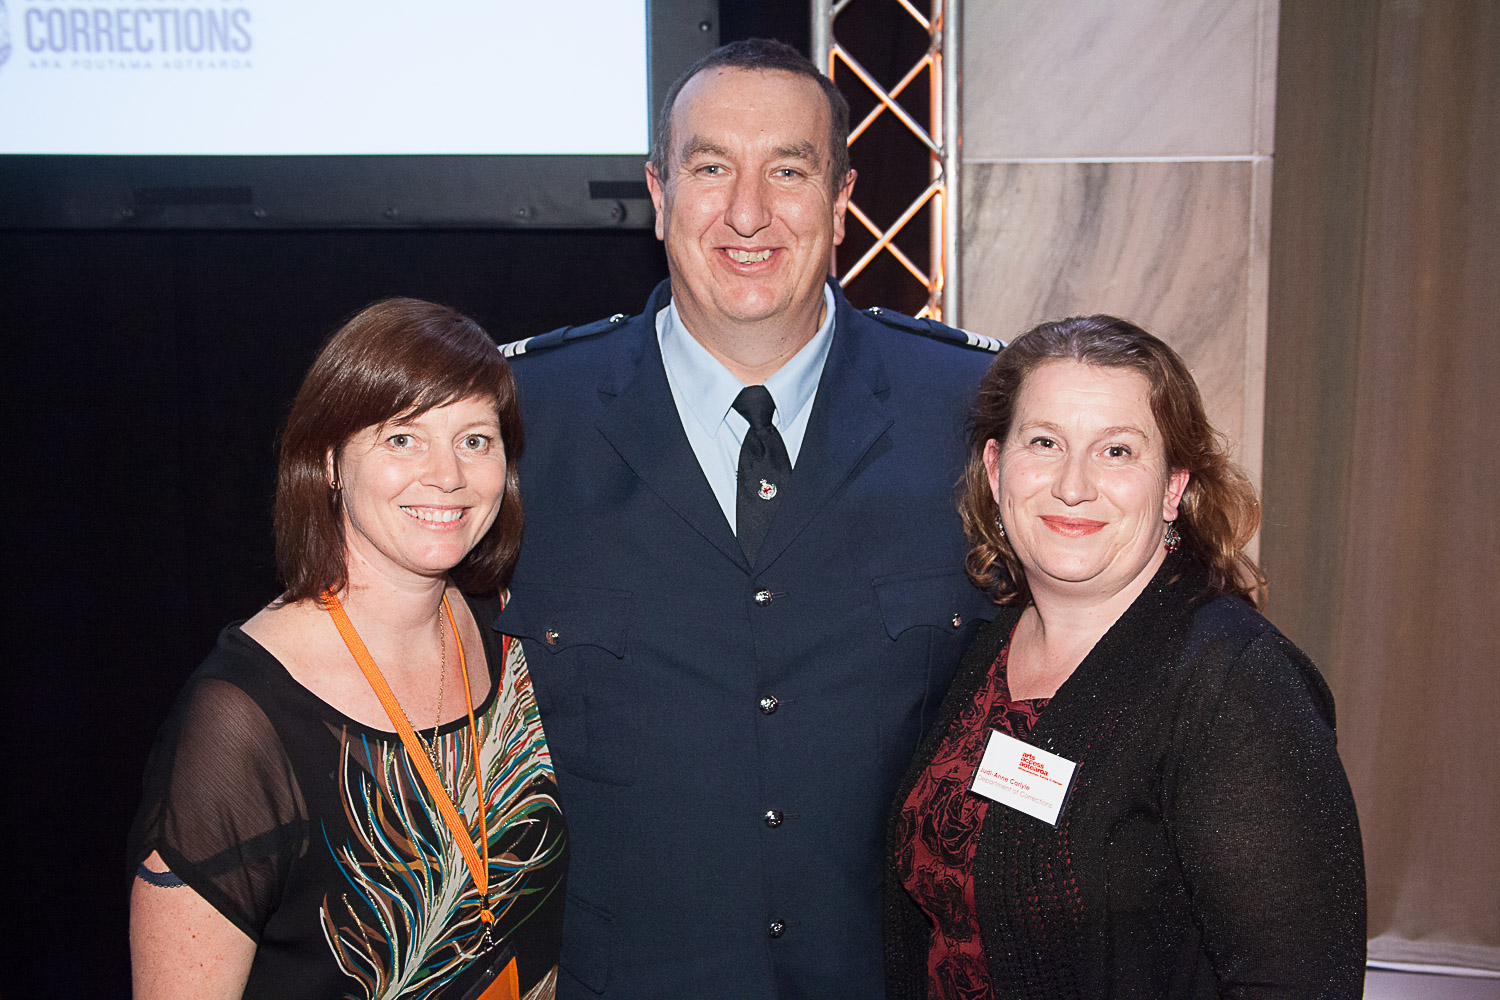 Jacqui Moyes, Arts Access Aotearoa, with Jason Carlyle and Judi-Anne Carlyle, Department of Corrections, at the Arts Access Awards 2014. Jason was recognised for his work in supporting arts actvities in Christchurch Prison as a rehabilitative tool.